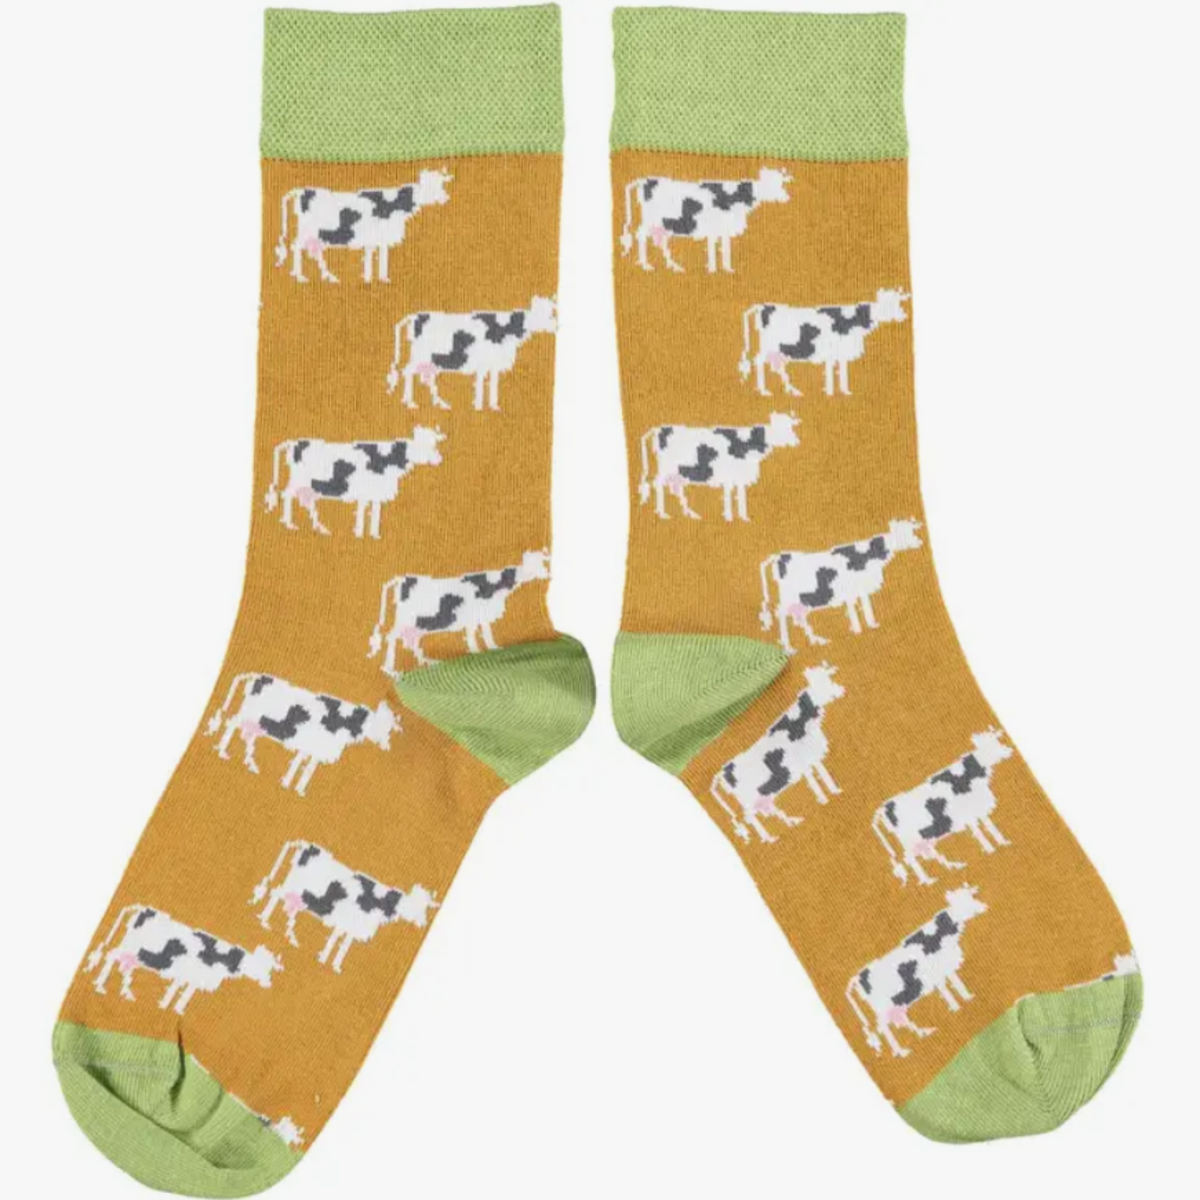 Catherine Tough Cow cotton women&#39;s crew socks featuring black and white cows on a ginger background with light green cuff, heel and toe